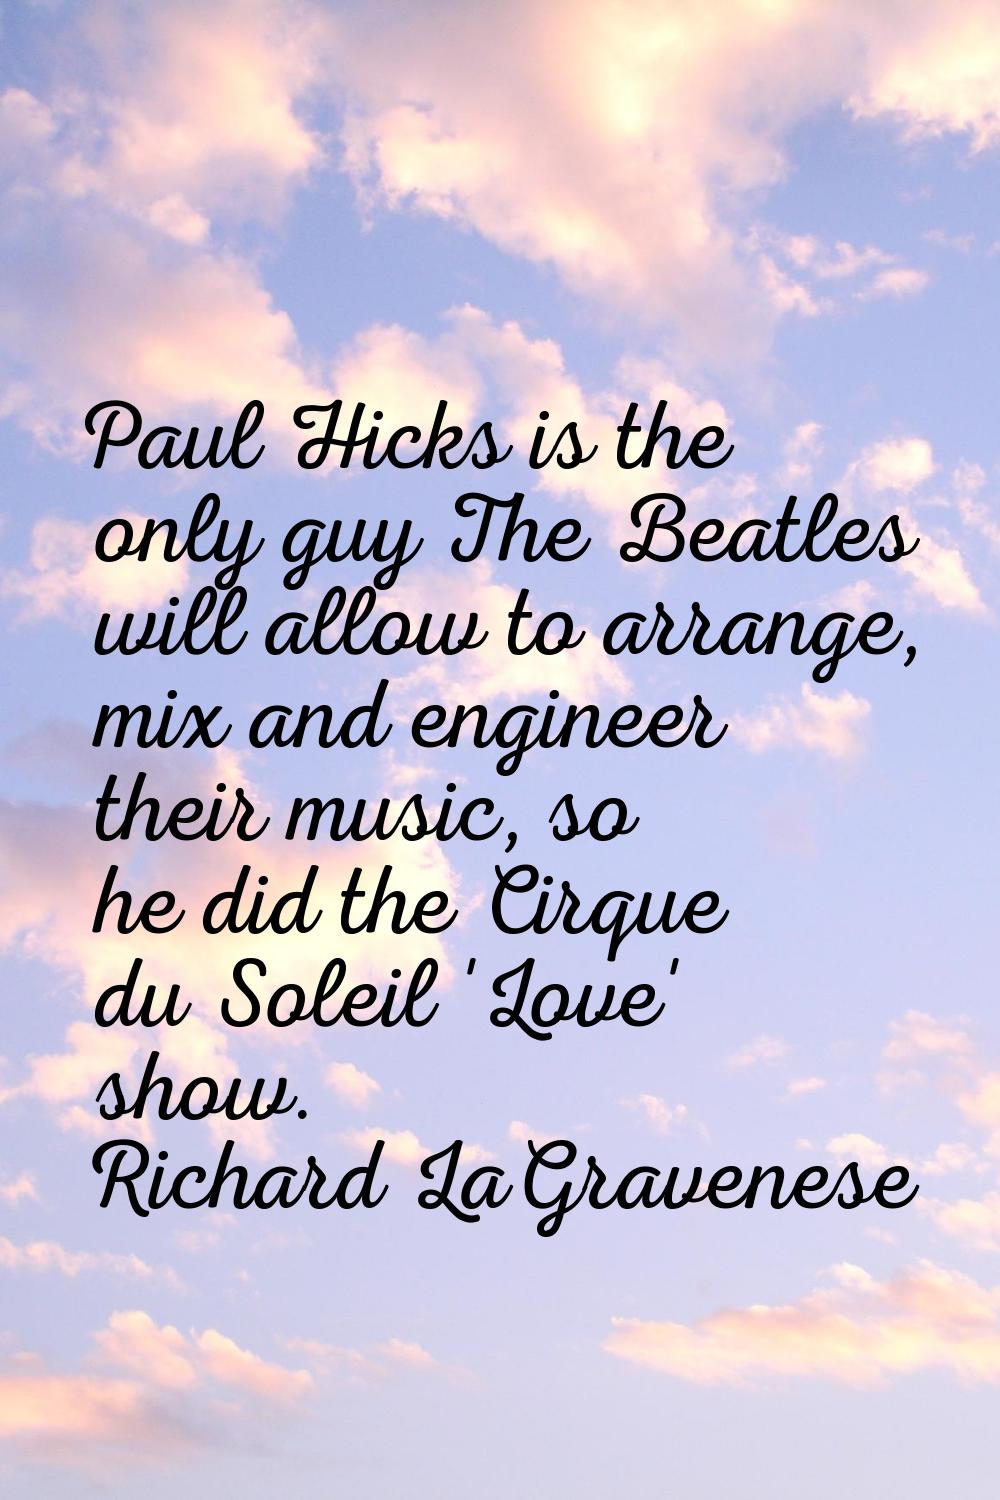 Paul Hicks is the only guy The Beatles will allow to arrange, mix and engineer their music, so he d